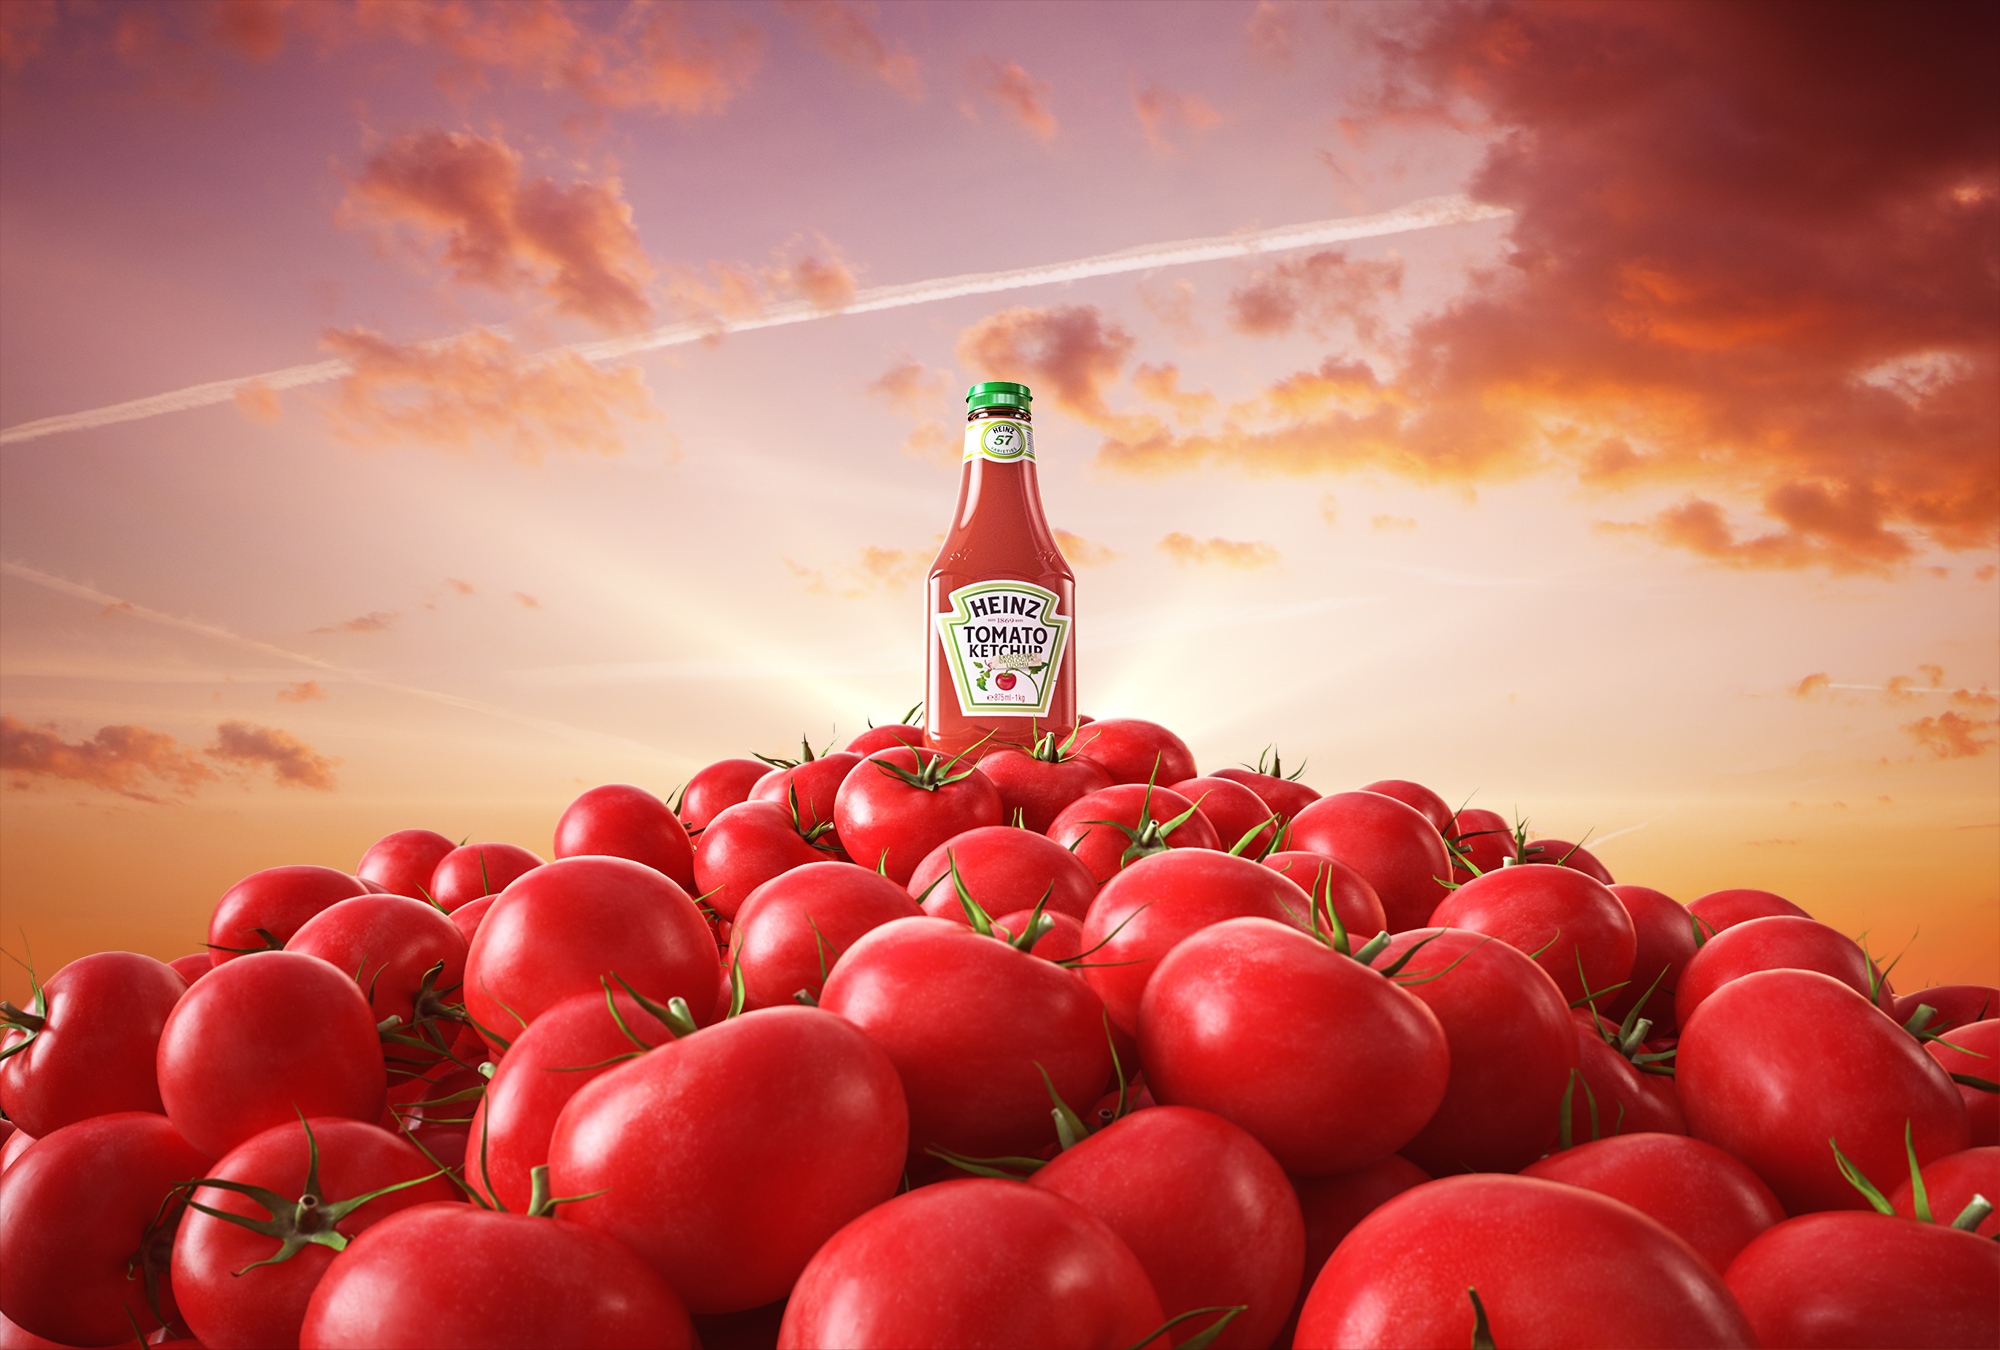 A mountain of tomatoes with a bottle of heinz ketchup on top